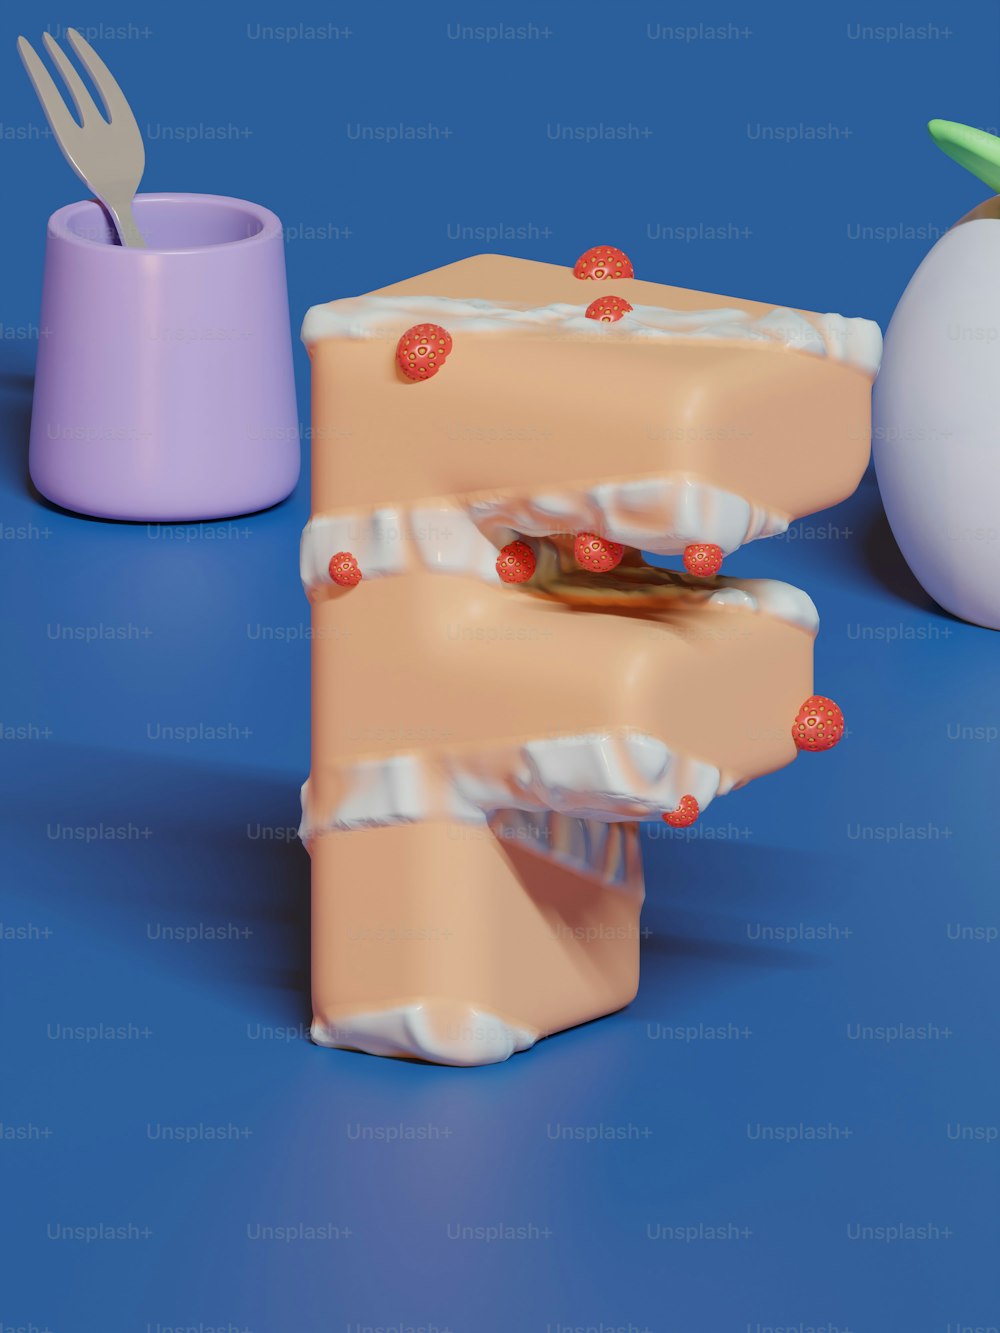 a 3d model of a piece of cake with a fork sticking out of it